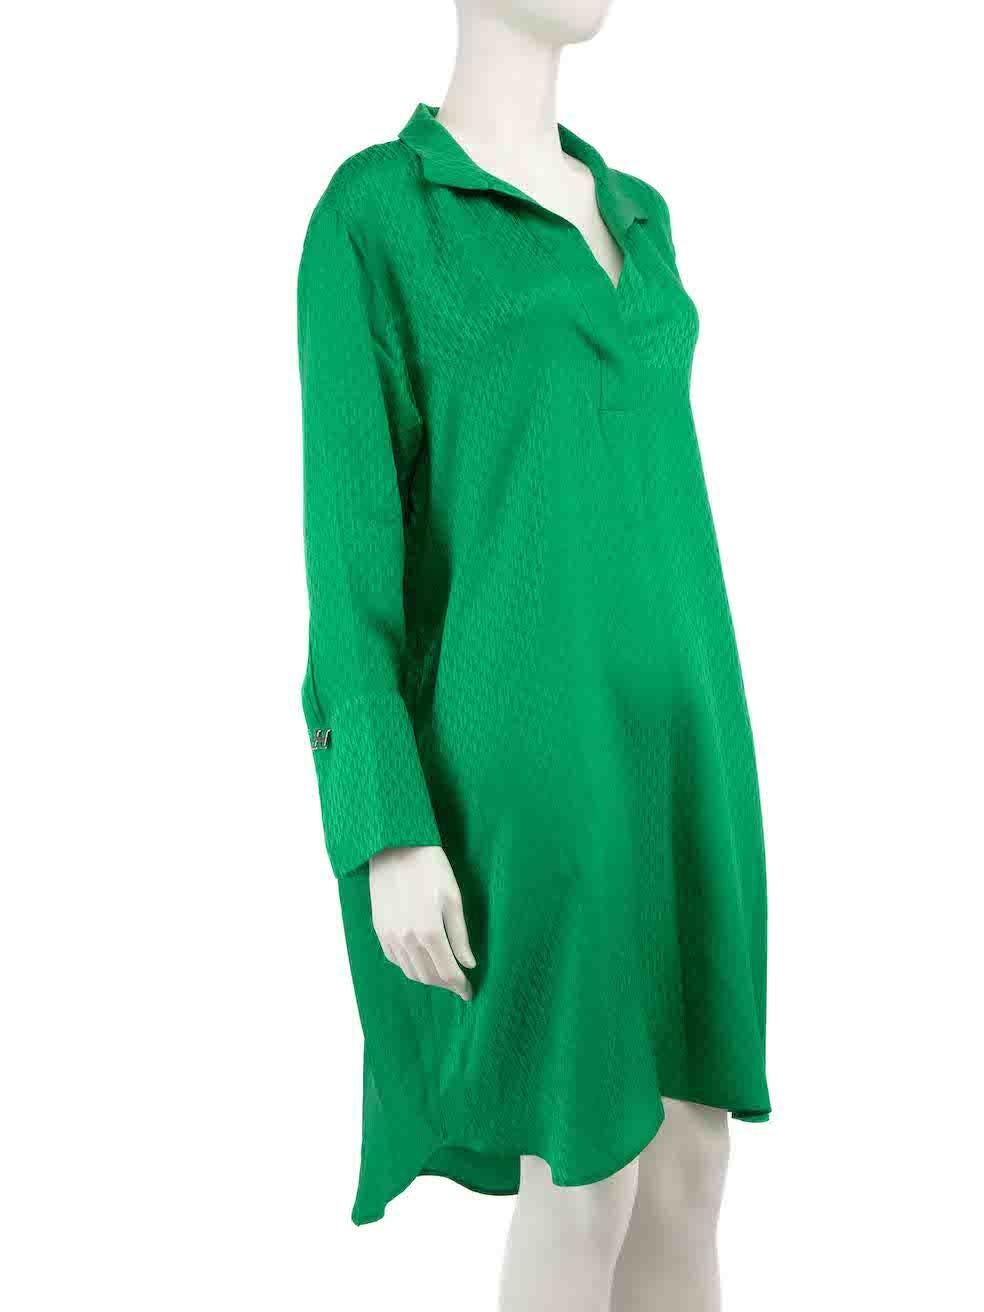 CONDITION is Very good. Hardly any visible wear to dress is evident on this used Carolina Herrera designer resale item.
 
 
 
 Details
 
 
 Green
 
 Silk
 
 Knee length dress
 
 V neckline
 
 Collared
 
 CH logo pattern
 
 CH logo button on cuffs
 
